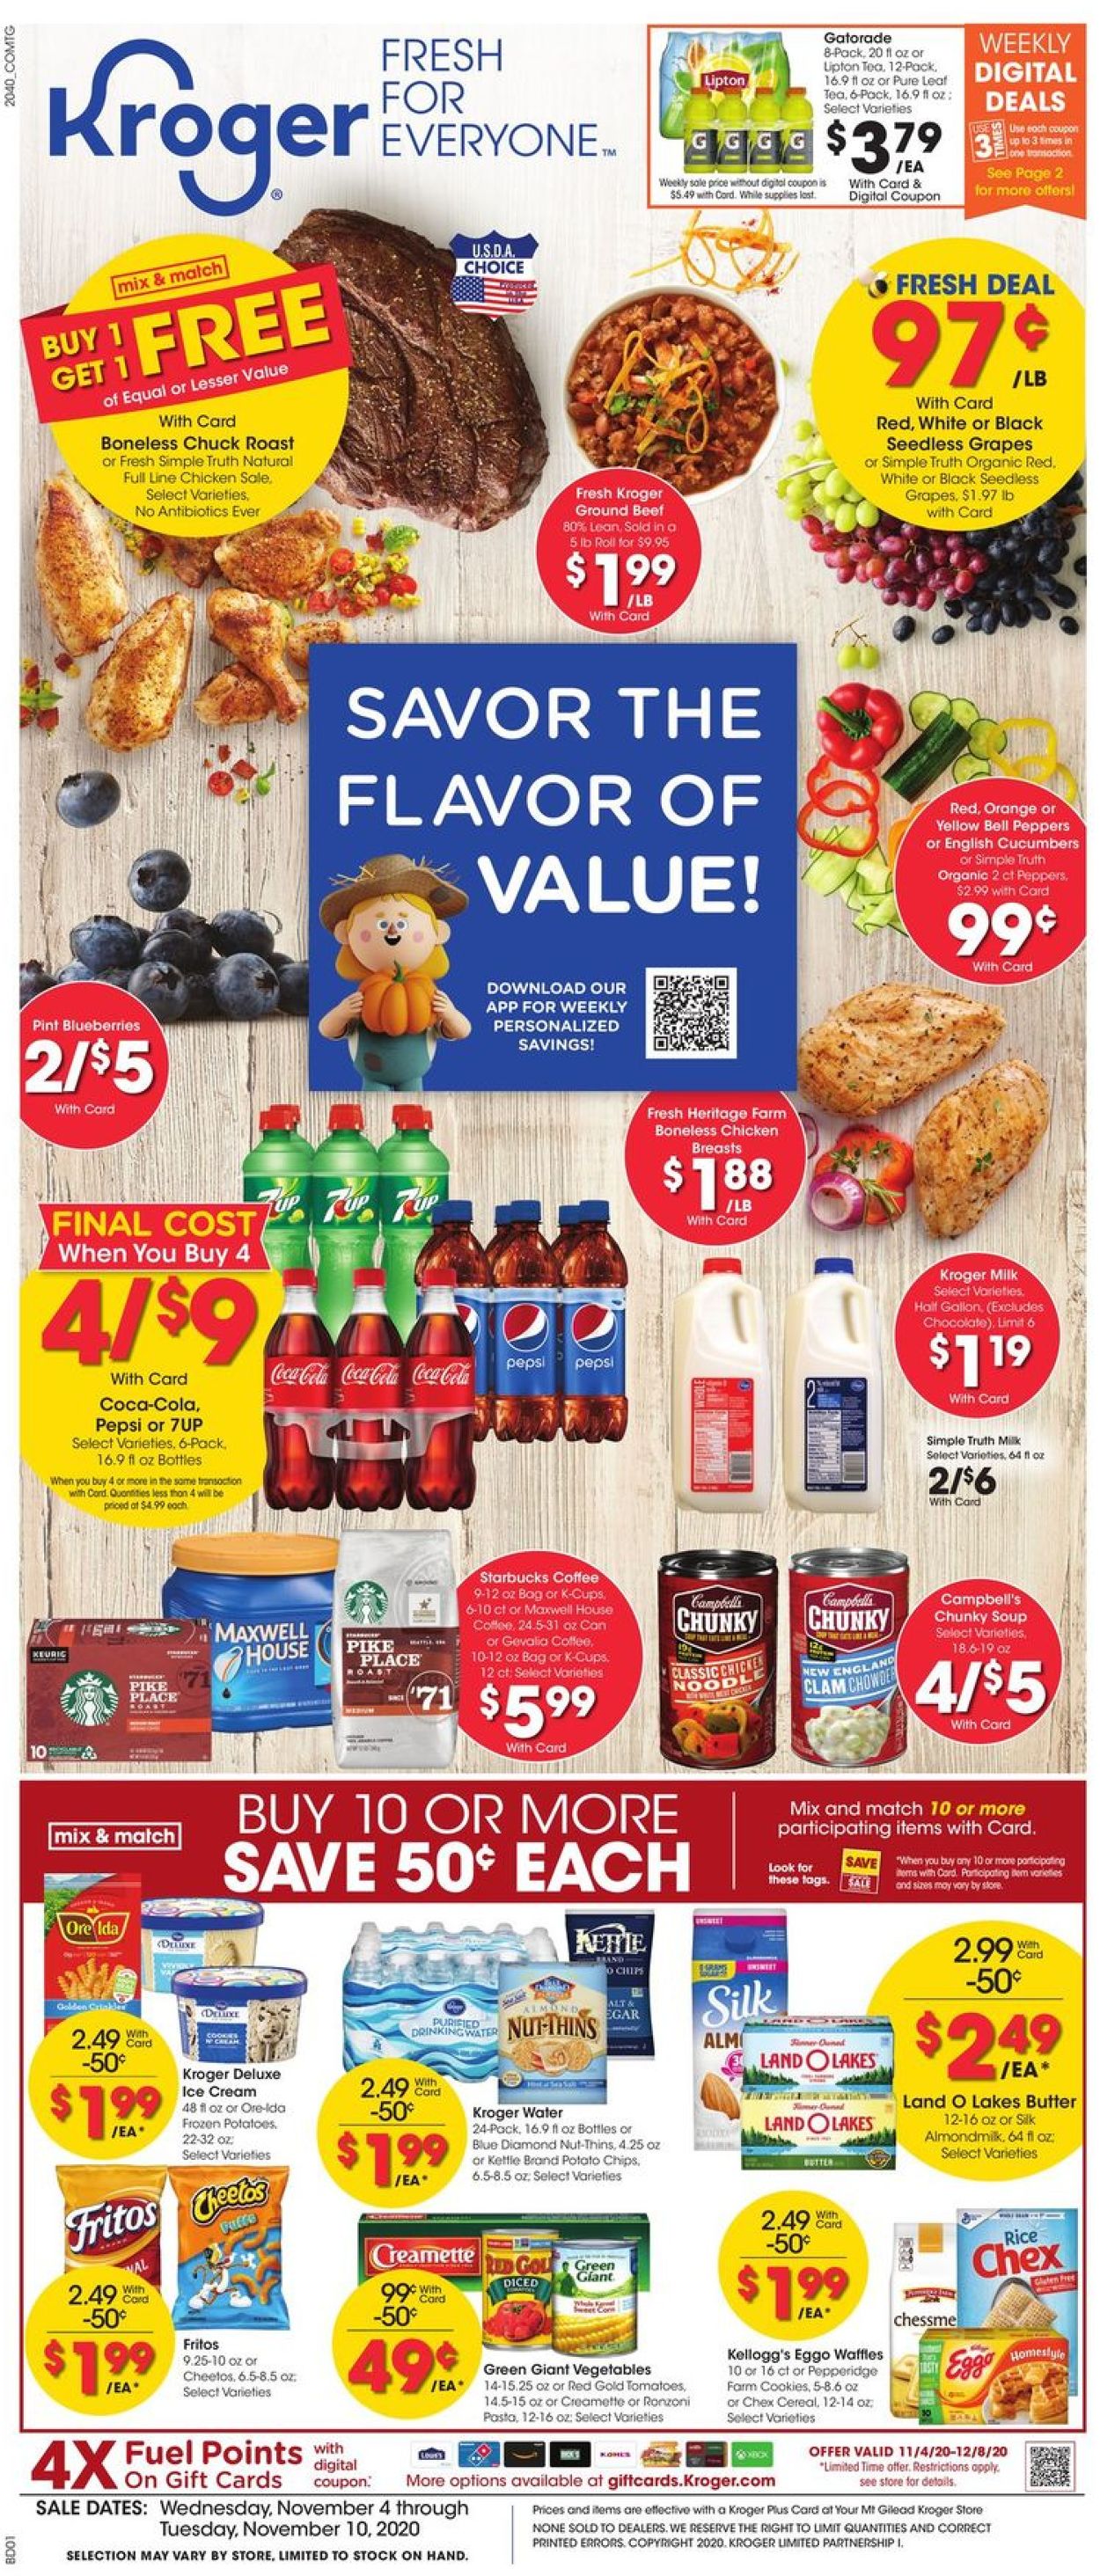 Kroger Current weekly ad 11/04 - 11/10/2020 - frequent-ads.com